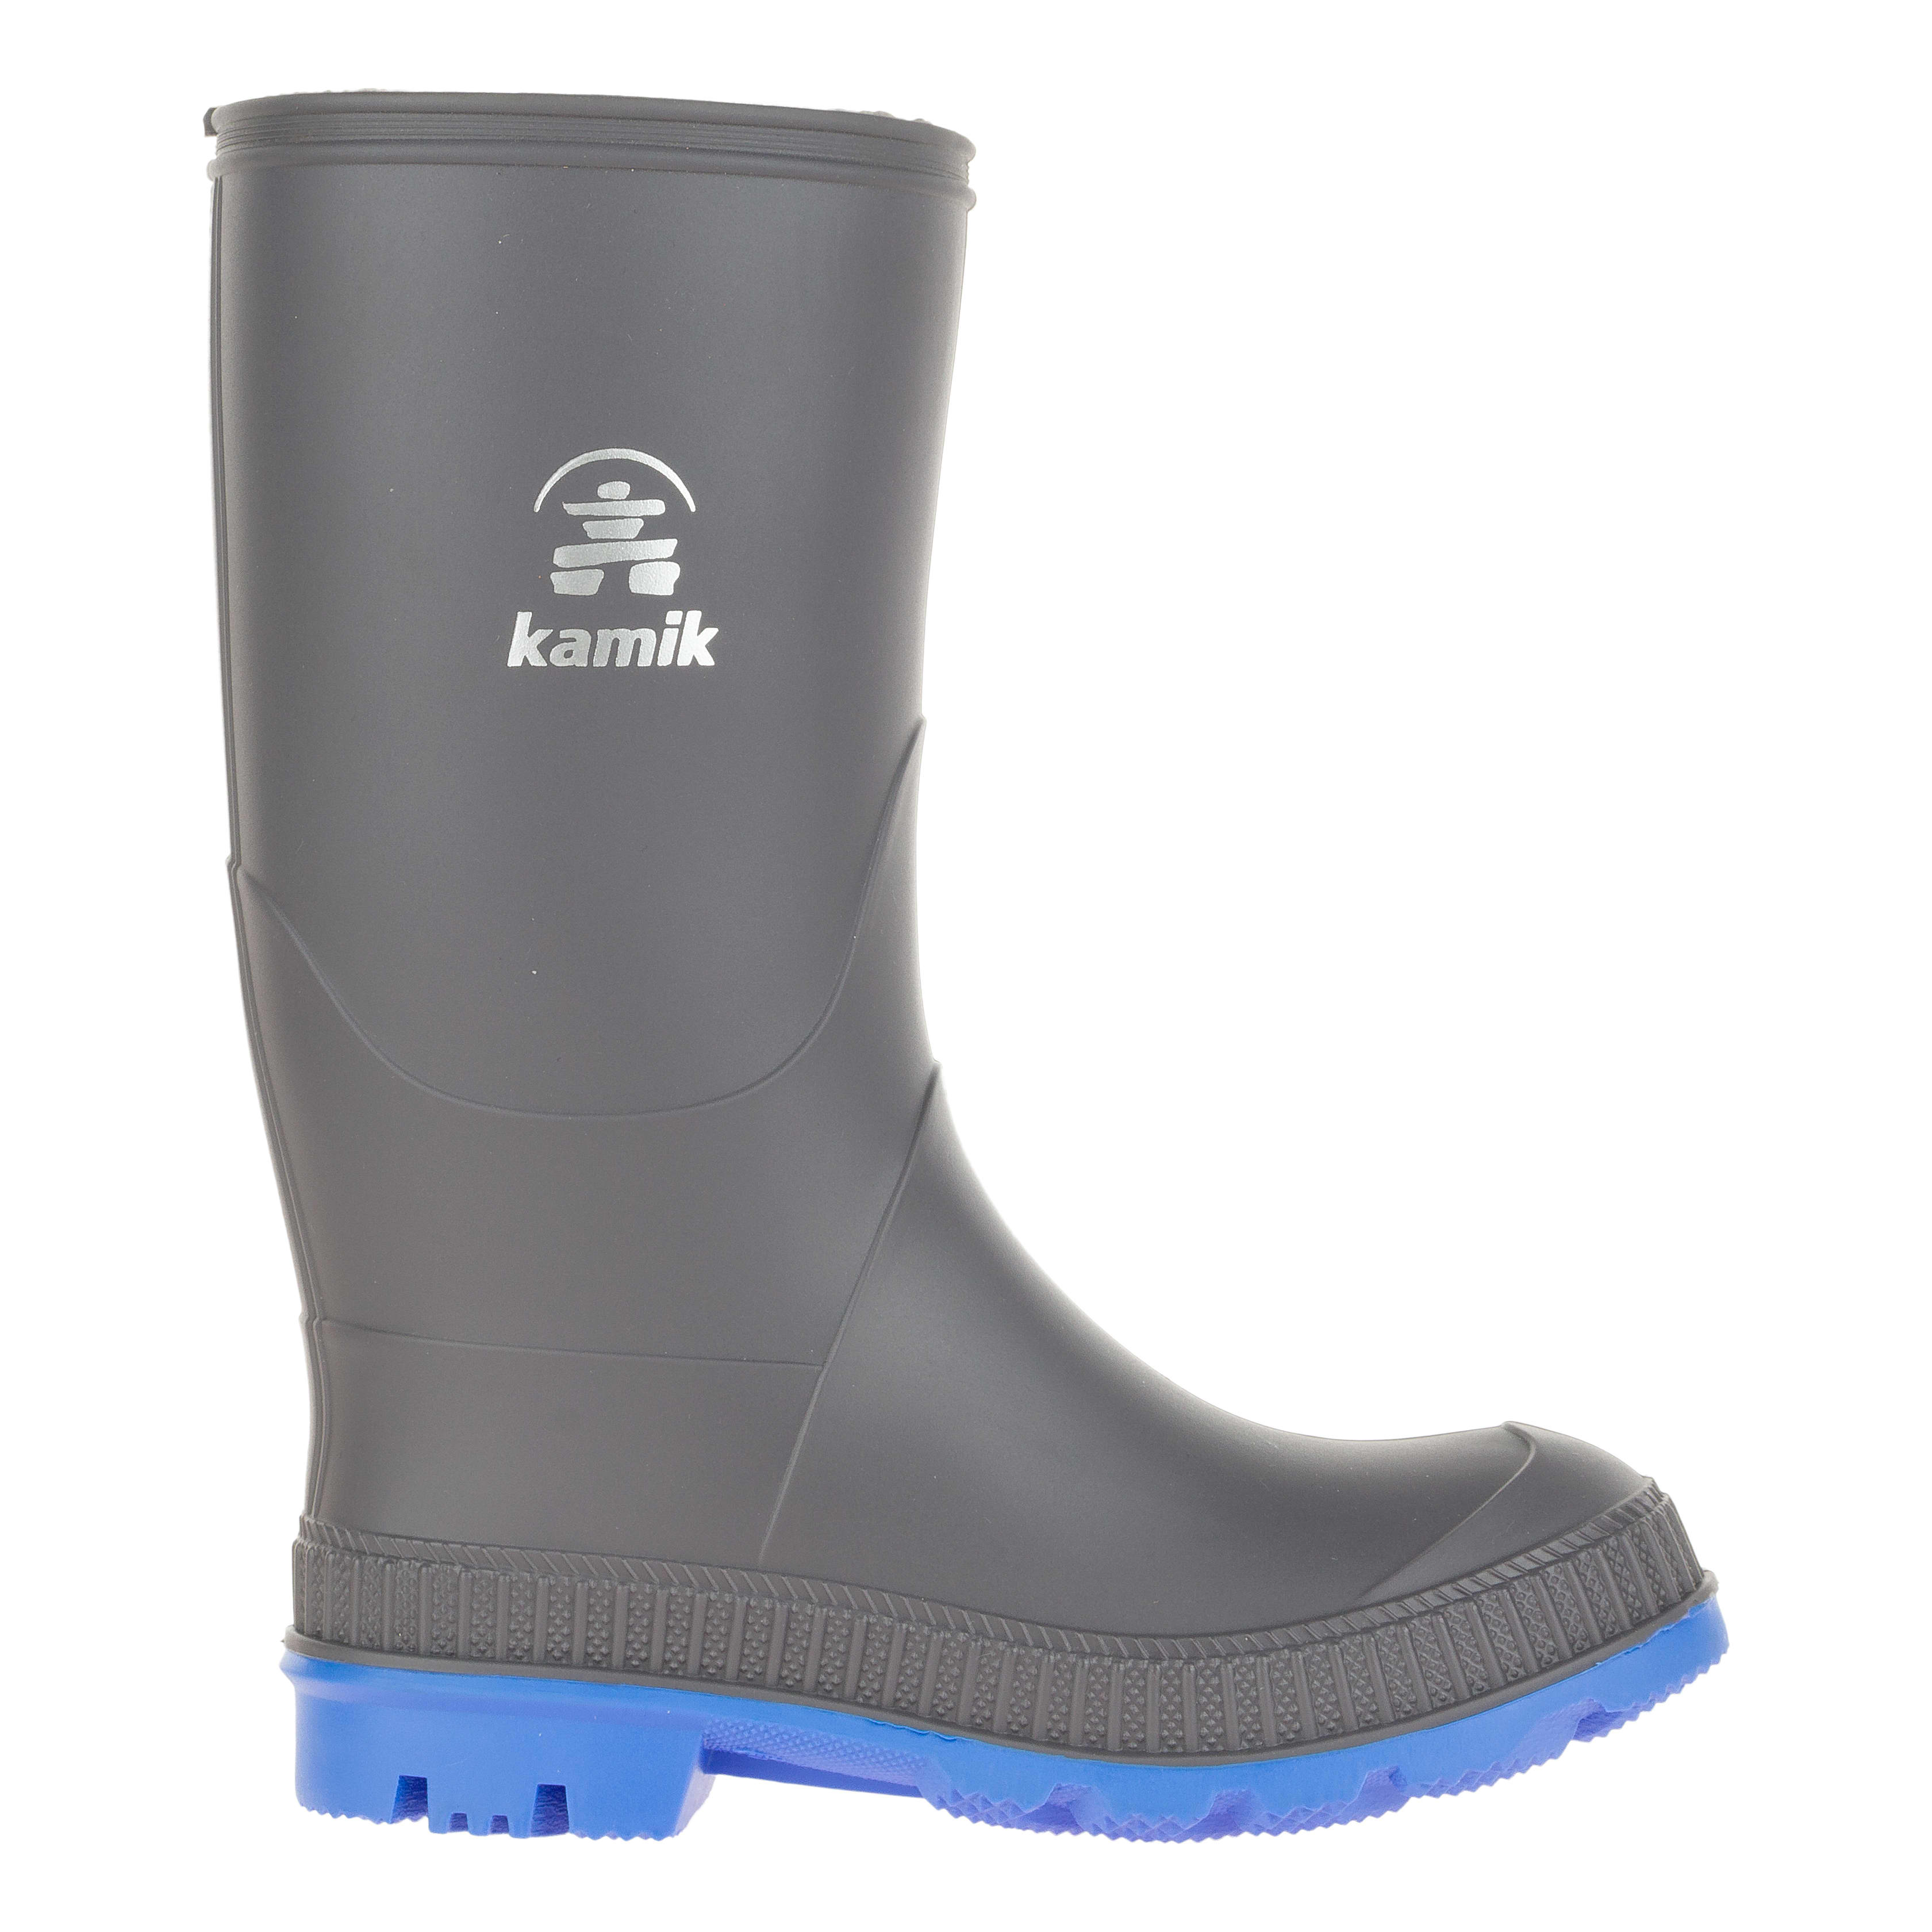 Kamik® Toddlers’ Stomp Rubber Boot - Charcoal/Blue